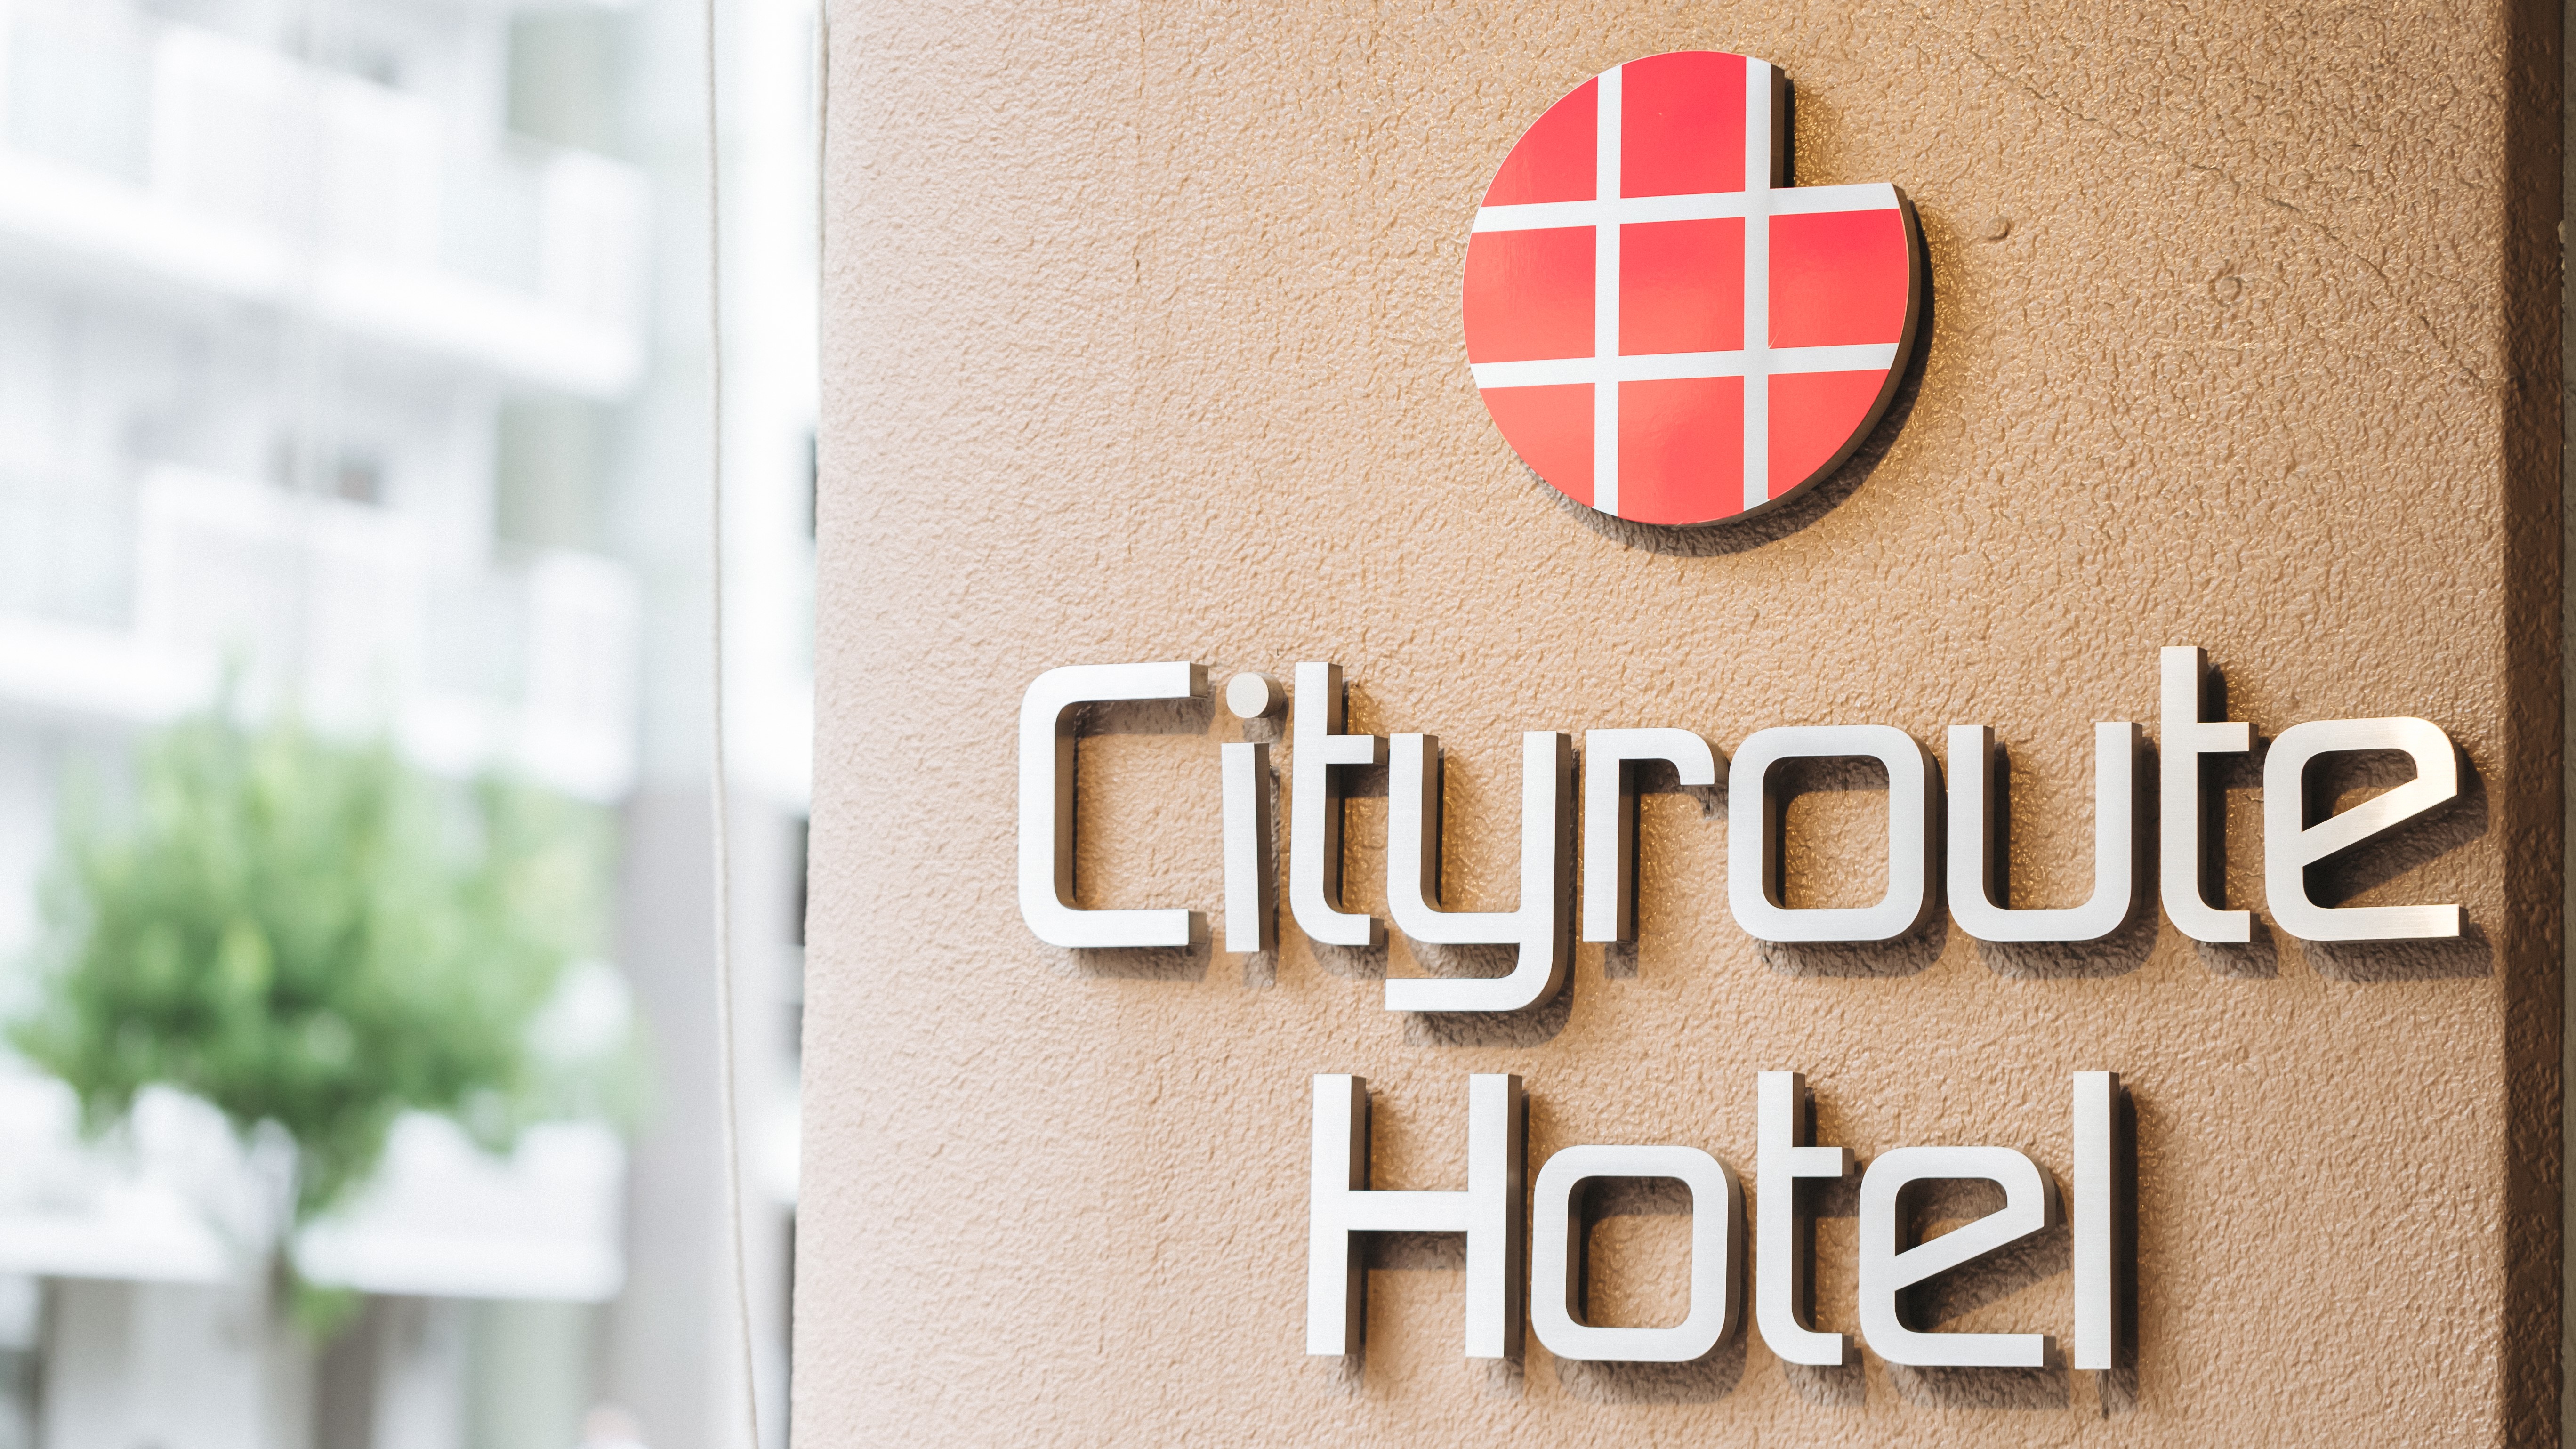 City Route Hotel